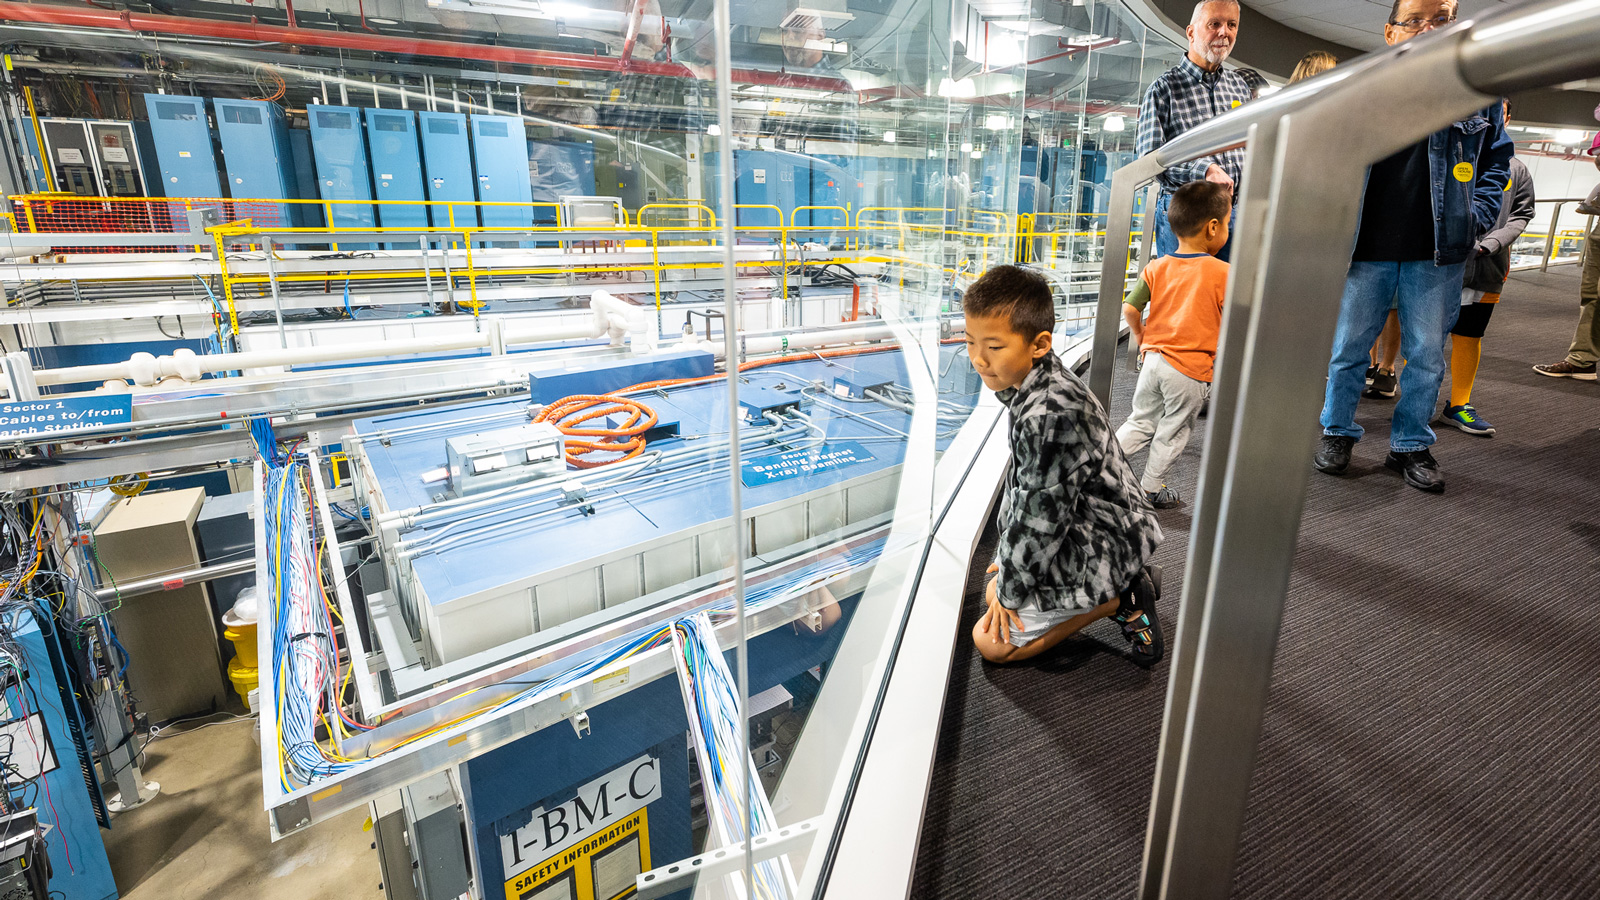 A boy sits on the floor to see instruments below that make up the Advanced Photon Source during a facility tourat Argonne National Laboratory's Open House.